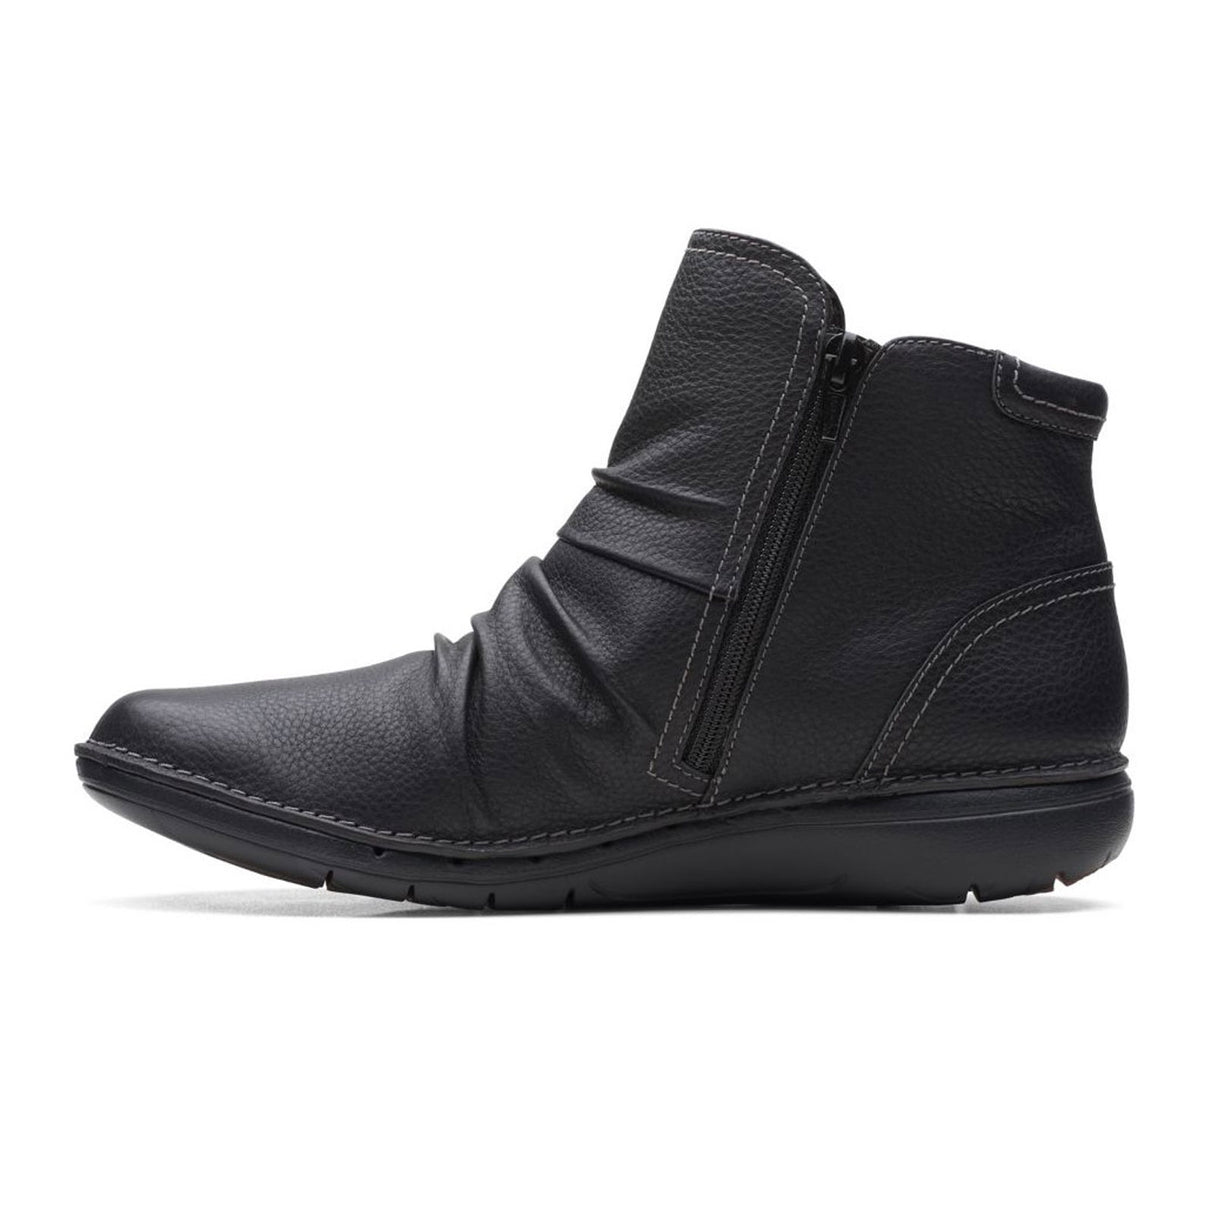 Clarks Un Loop Top Ankle Boot (Women) - Black Leather Boots - Fashion - Ankle Boot - The Heel Shoe Fitters